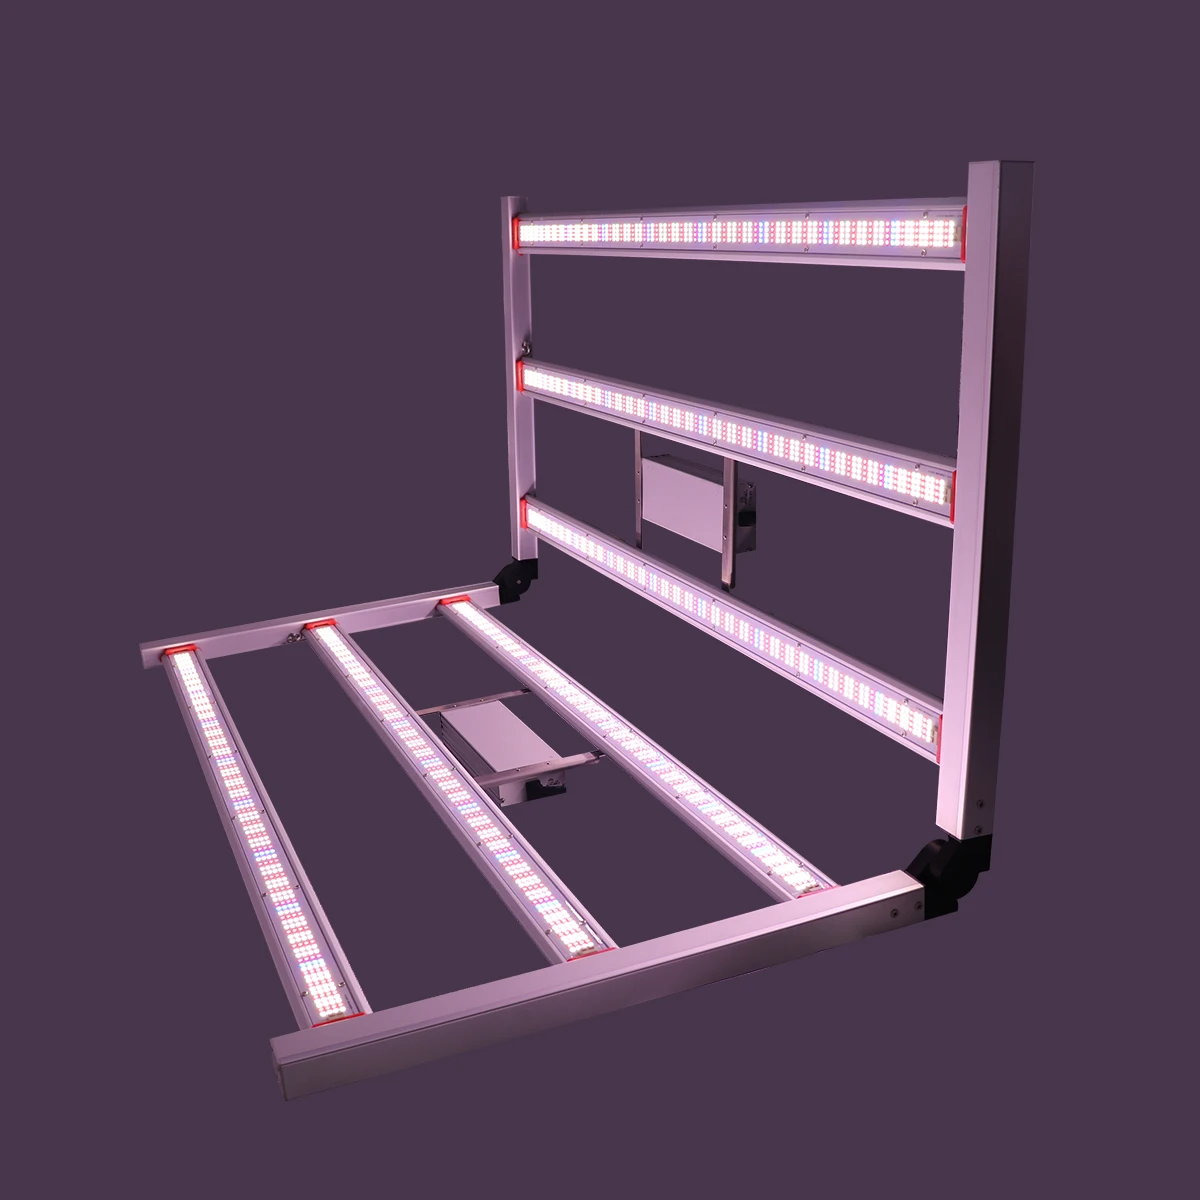 

Factory Wholesale 640w LED Grow Light Bars For Herb Indoor Cultivation Veg Bloom Foldable Full Spectrum Hot Sale Free Shipping